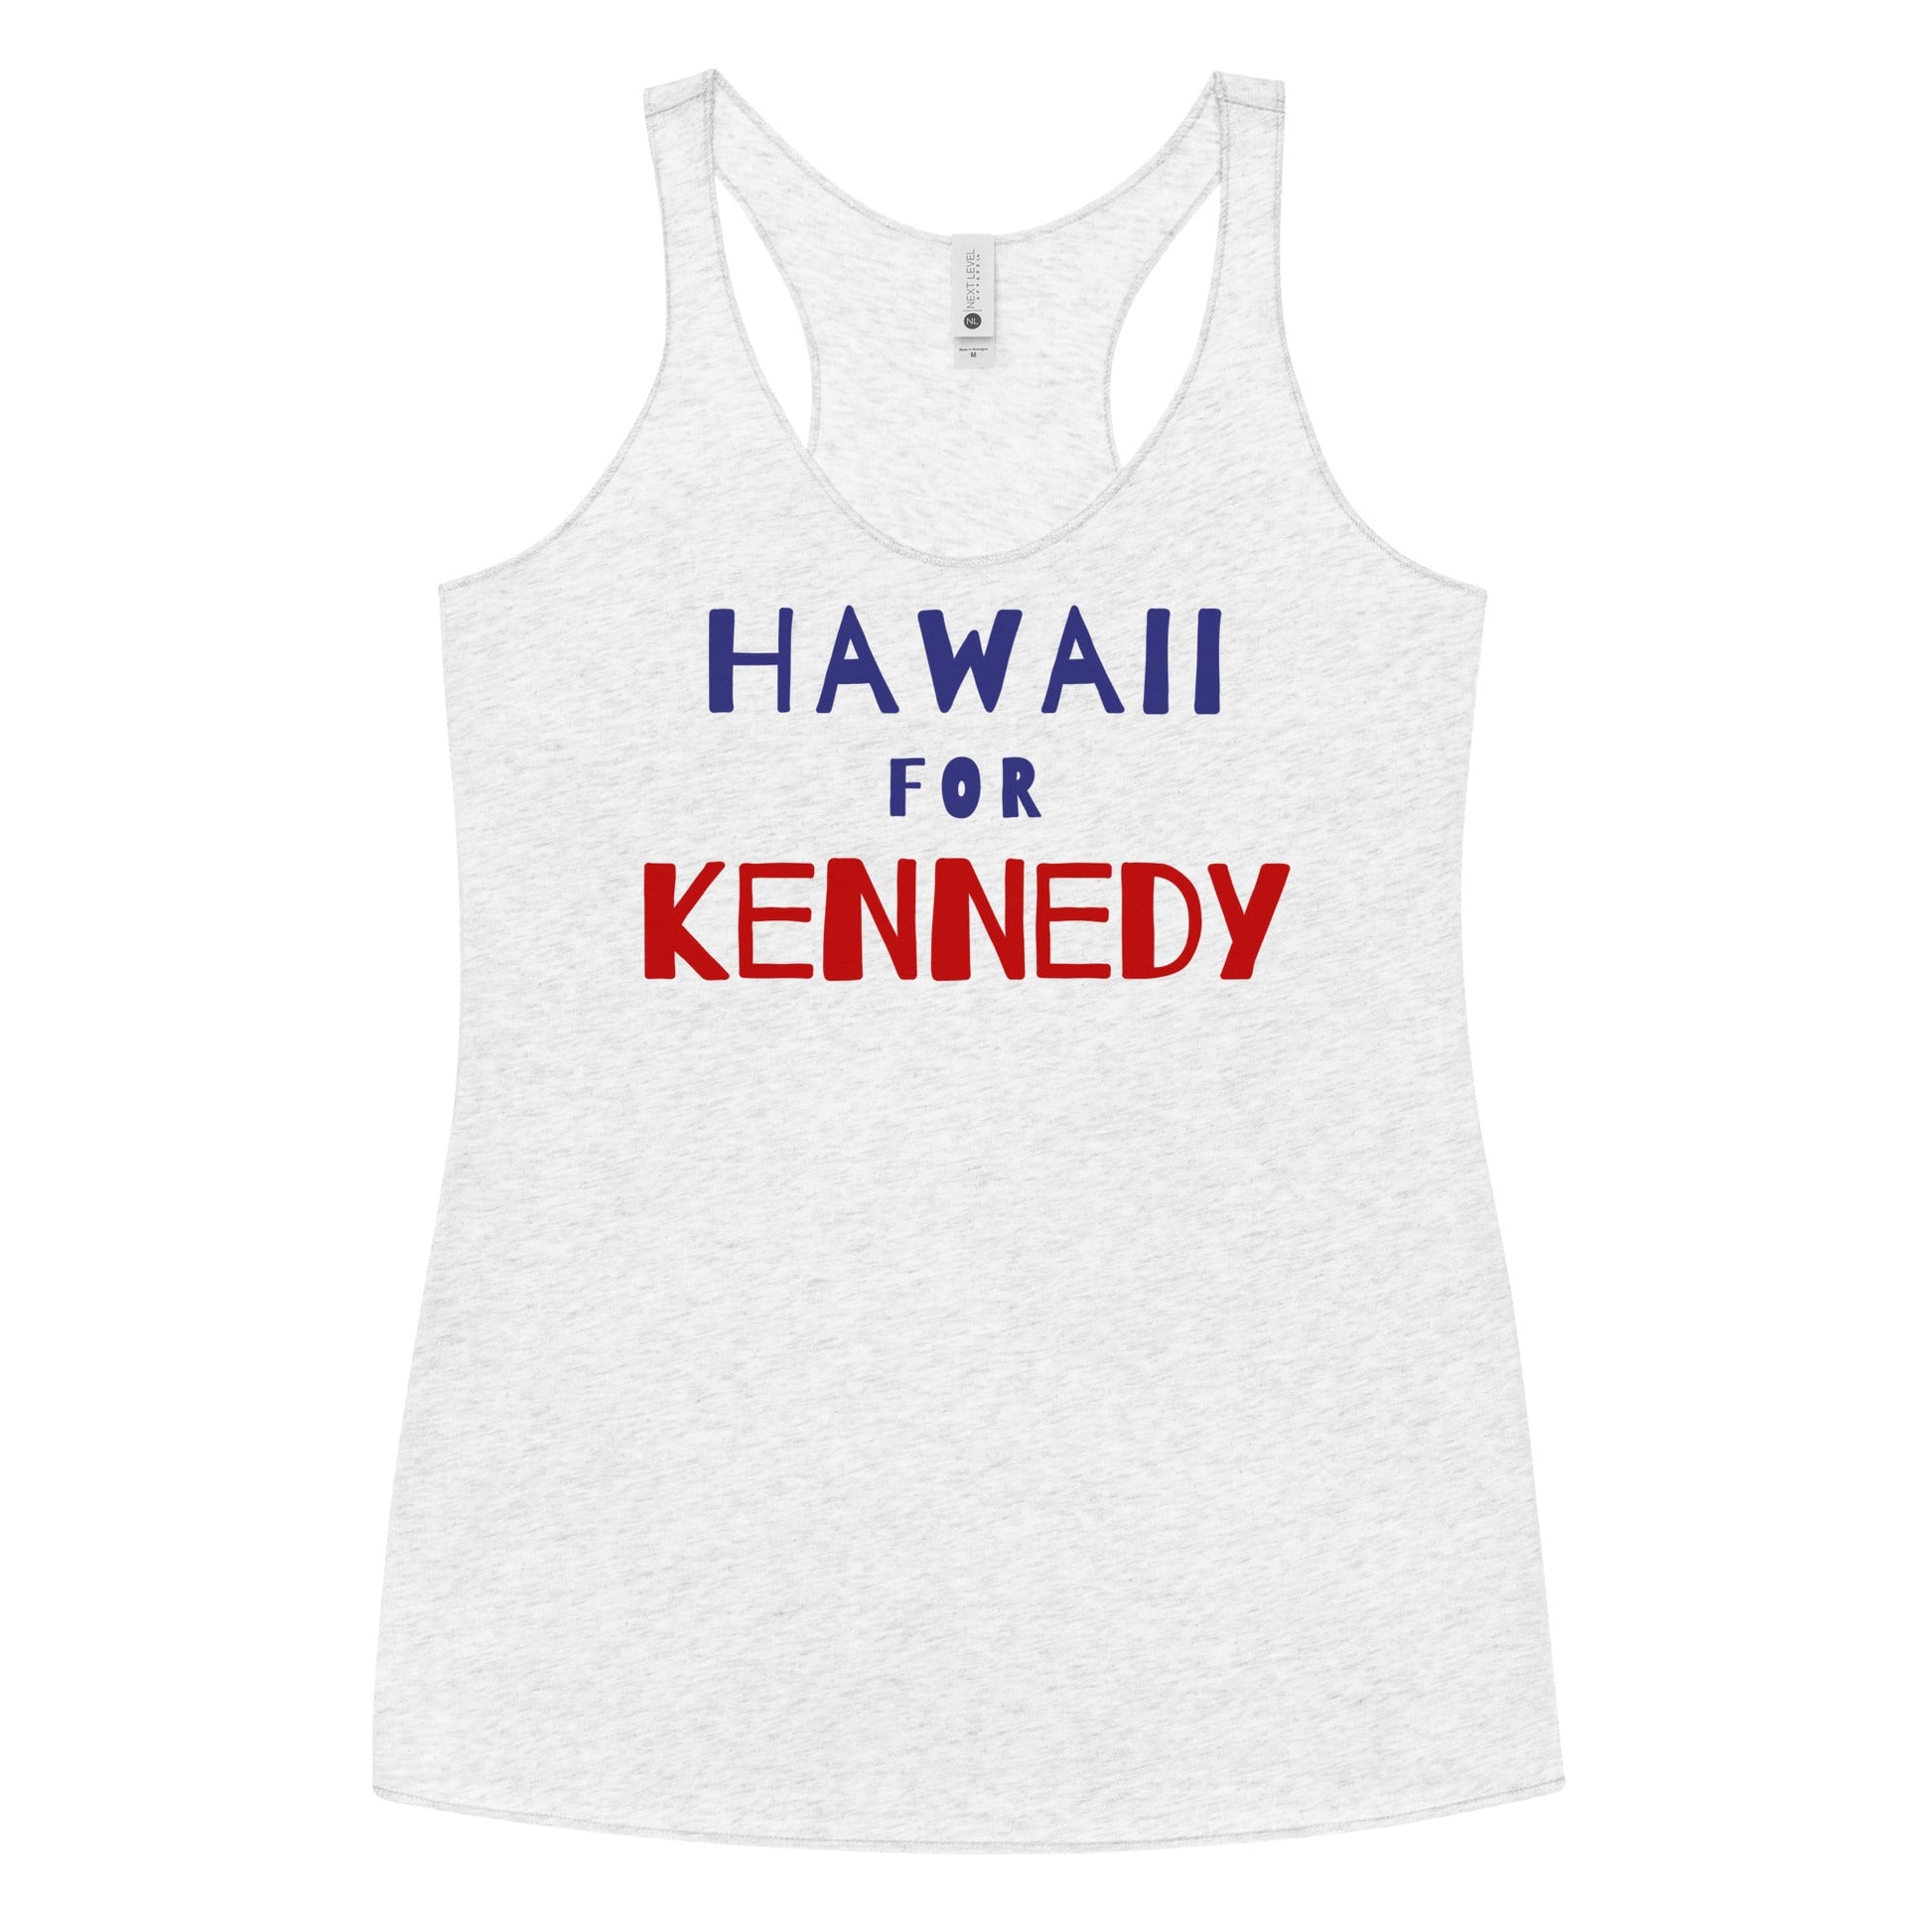 Hawaii for Kennedy Women's Racerback Tank - TEAM KENNEDY. All rights reserved